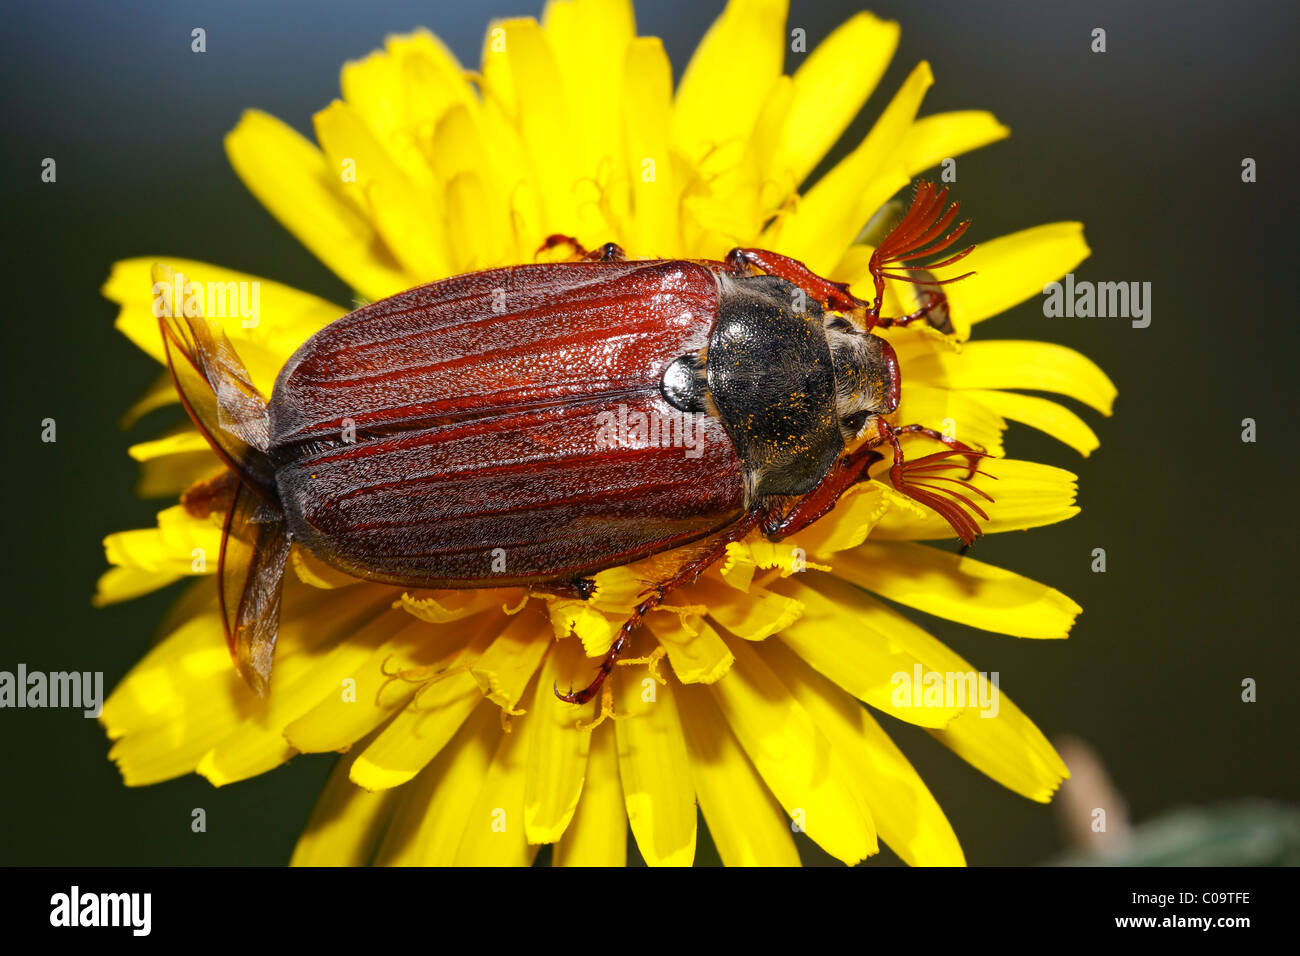 European cockchafer beetle or May beetle (Melolontha melolontha), with wings unfolded, on a dandelion flower (Taraxacum Stock Photo